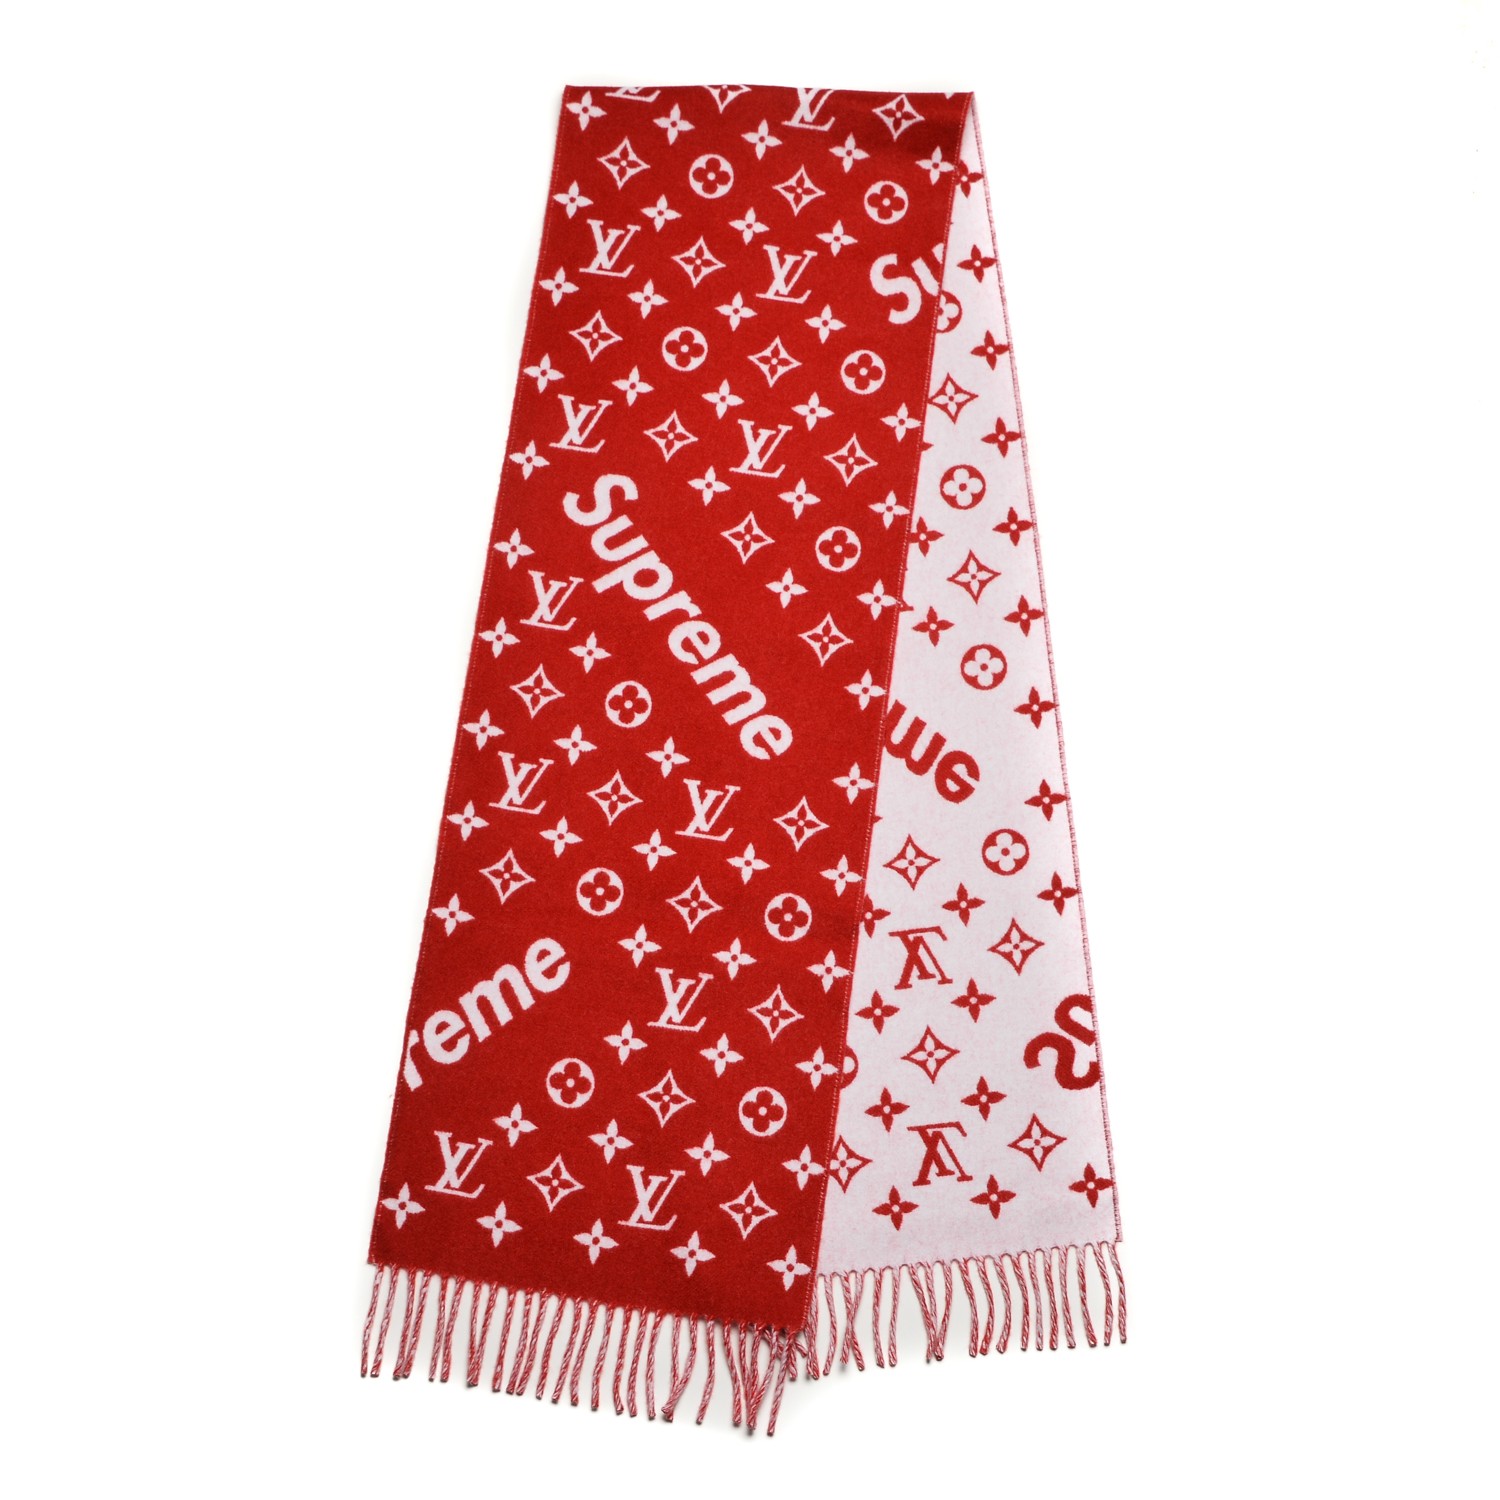 Louis Vuitton Monogram Logomania Scarf, Red, * Inventory Confirmation Required